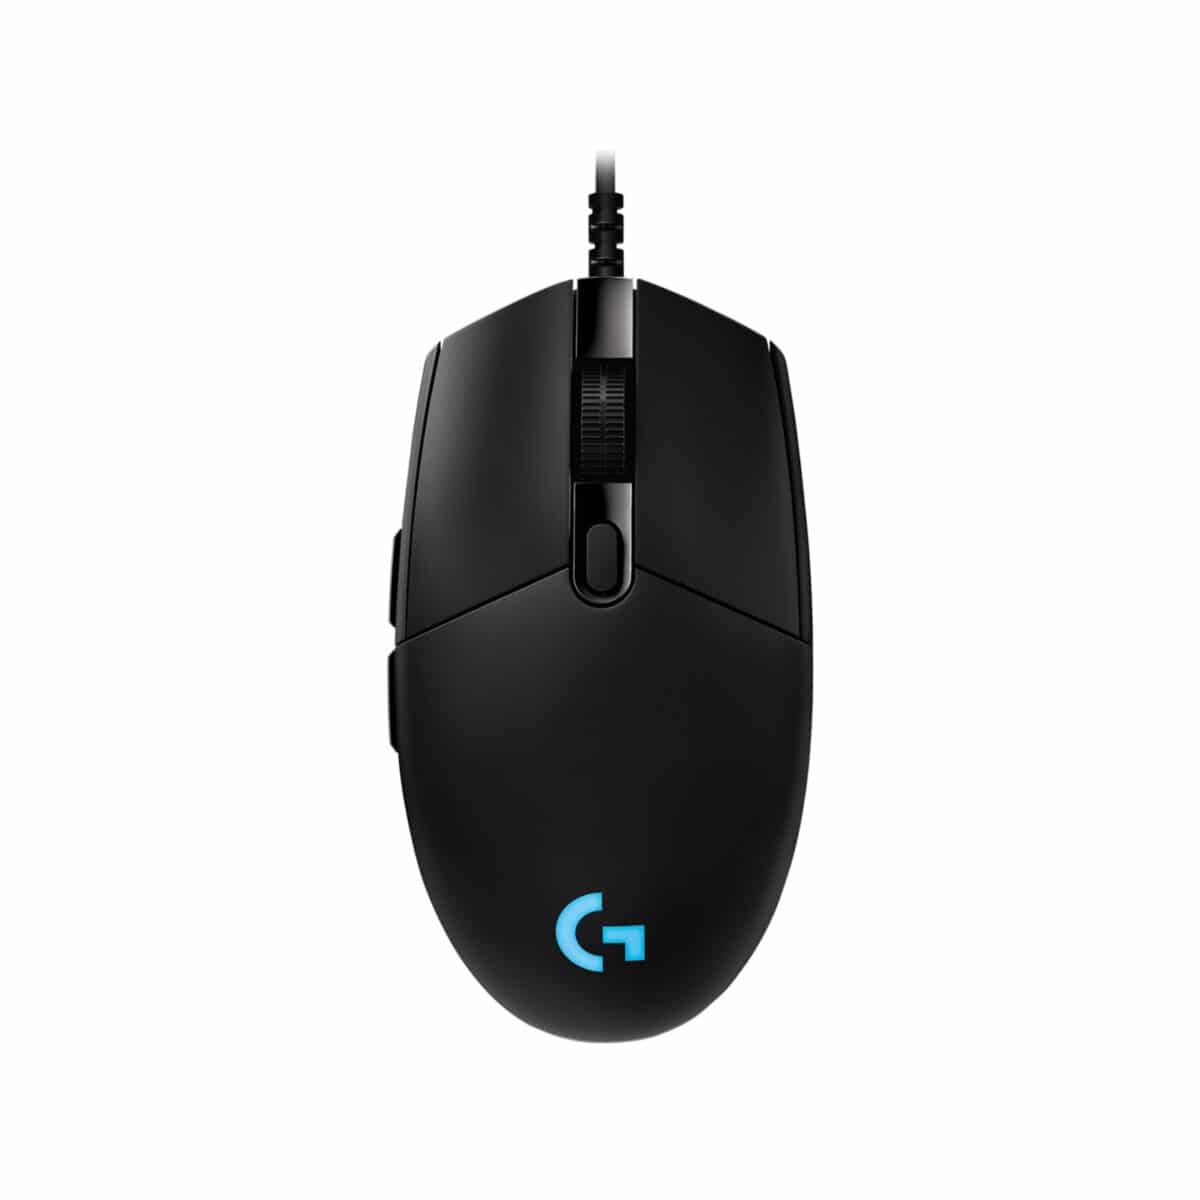 LOGITECH G PRO WIRED GAMING MOUSE WITH HERO SENSOR